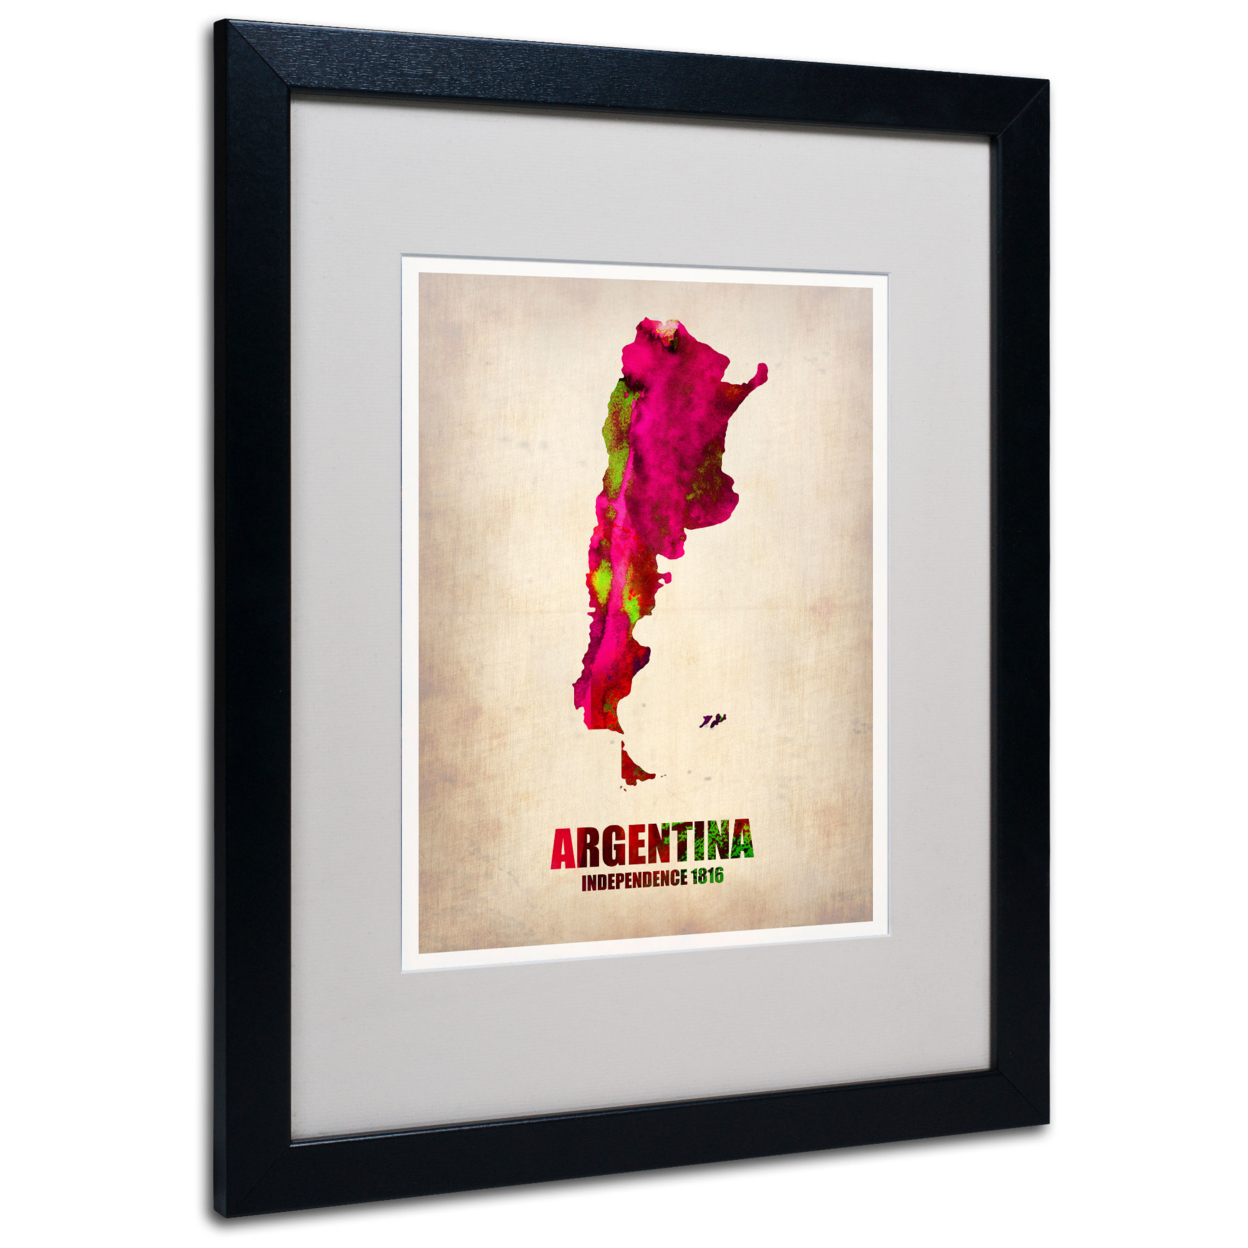 Naxart 'Argentina Watercolor Map' Black Wooden Framed Art 18 X 22 Inches